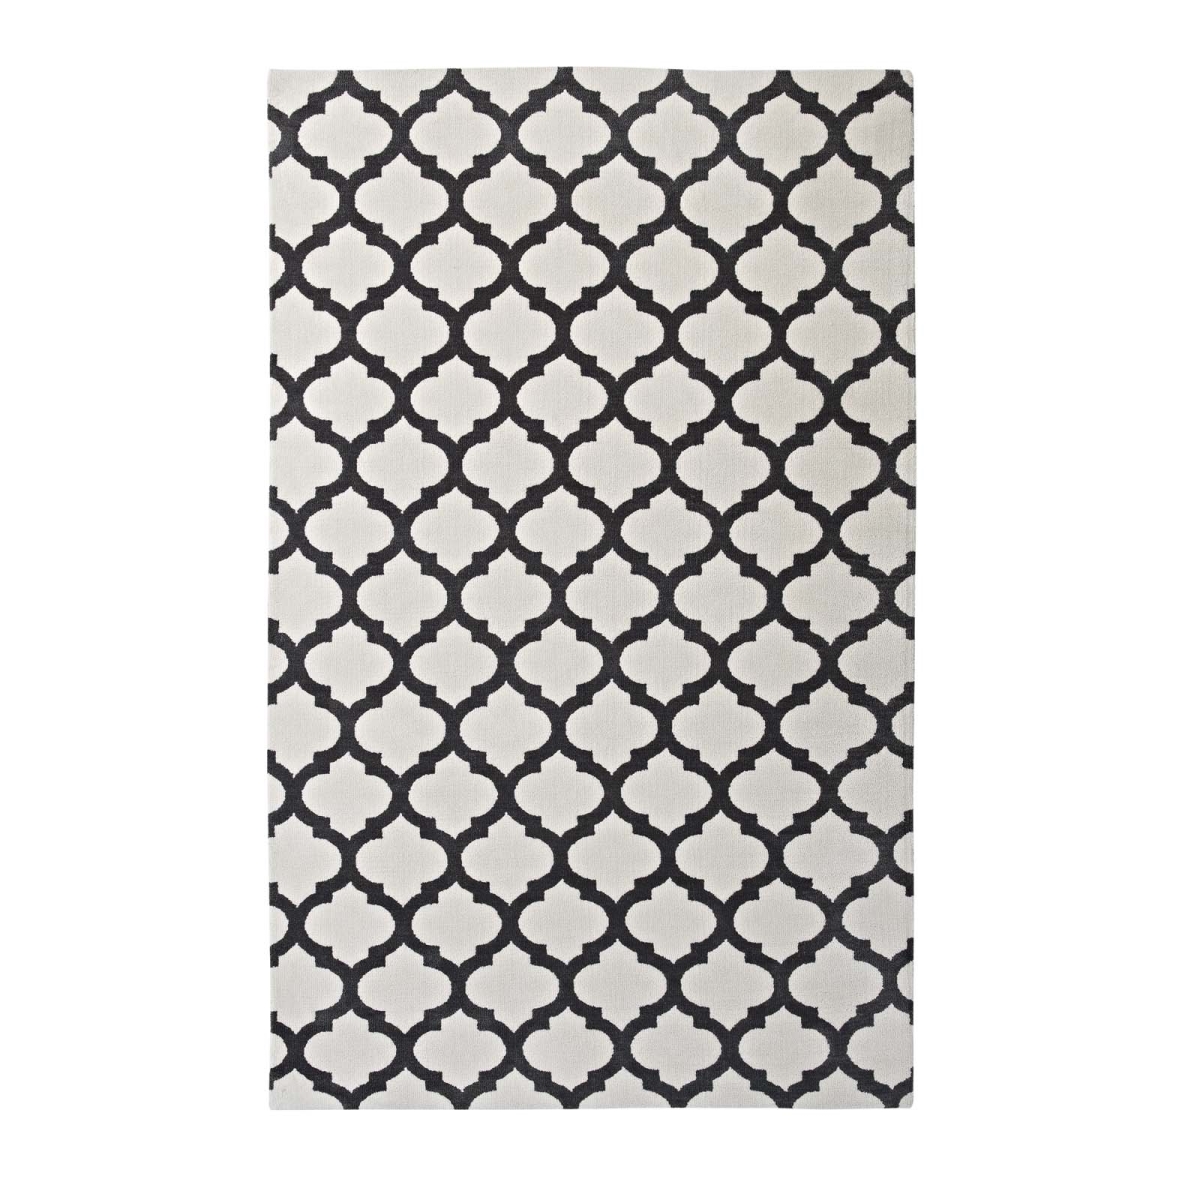 R-1001c-58 5 X 8 Ft. Lida Moroccan Trellis Polyester Area Rug - Ivory & Charcoal, 0.5 X 60 X 96 In.